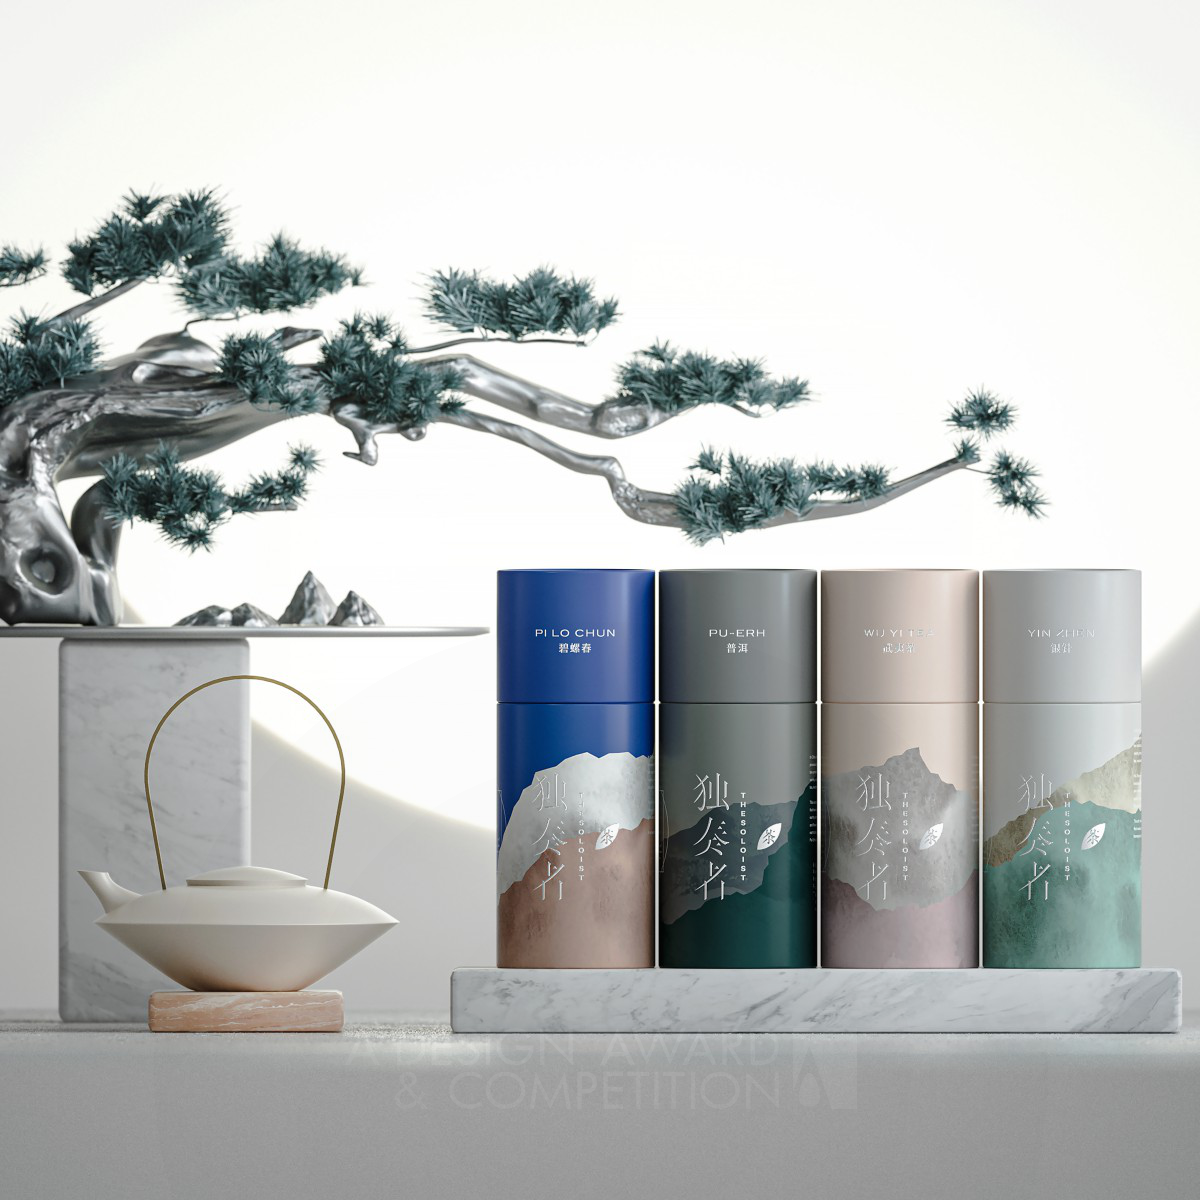 The Soloist Tea Packaging by LiDingding